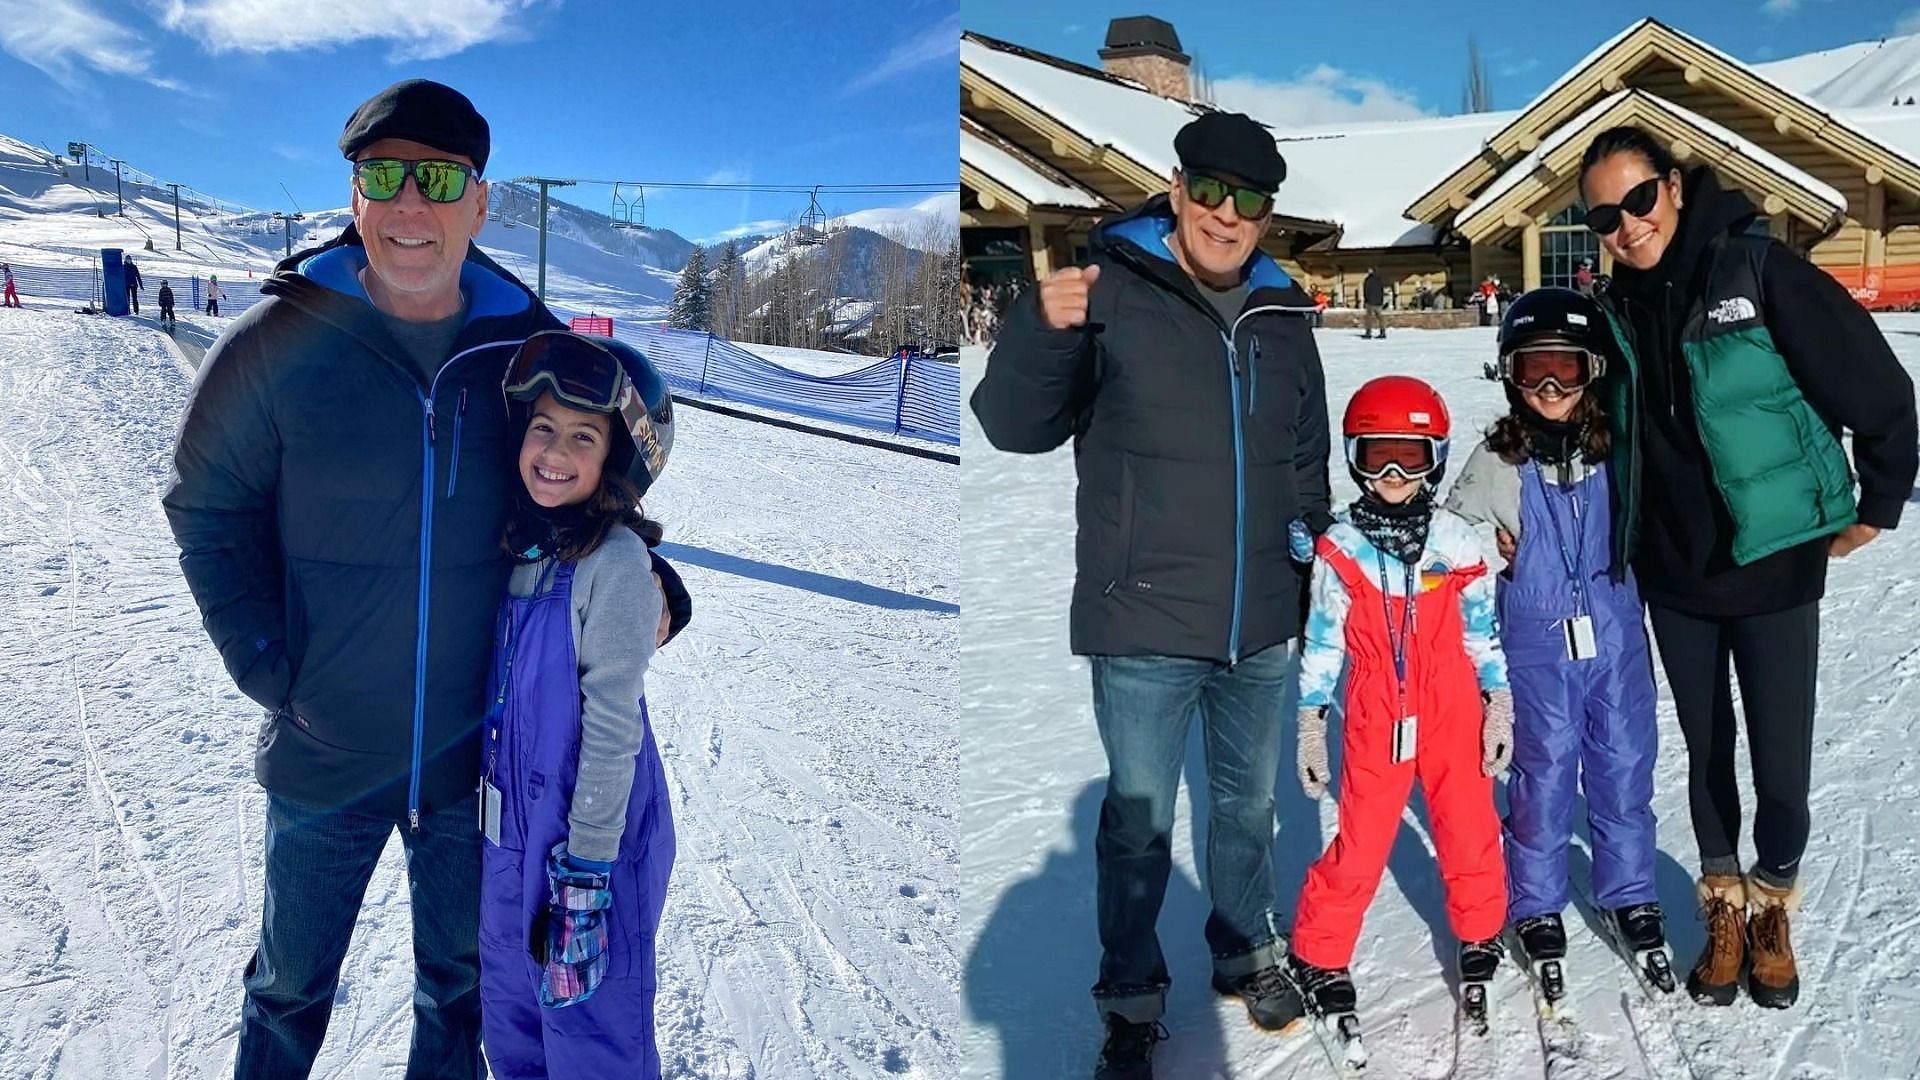 Bruce Willis went for a ski vacation with his wife Emma Heming Willis and their two daughters (Image via Emma Heming Willis/Instagram)